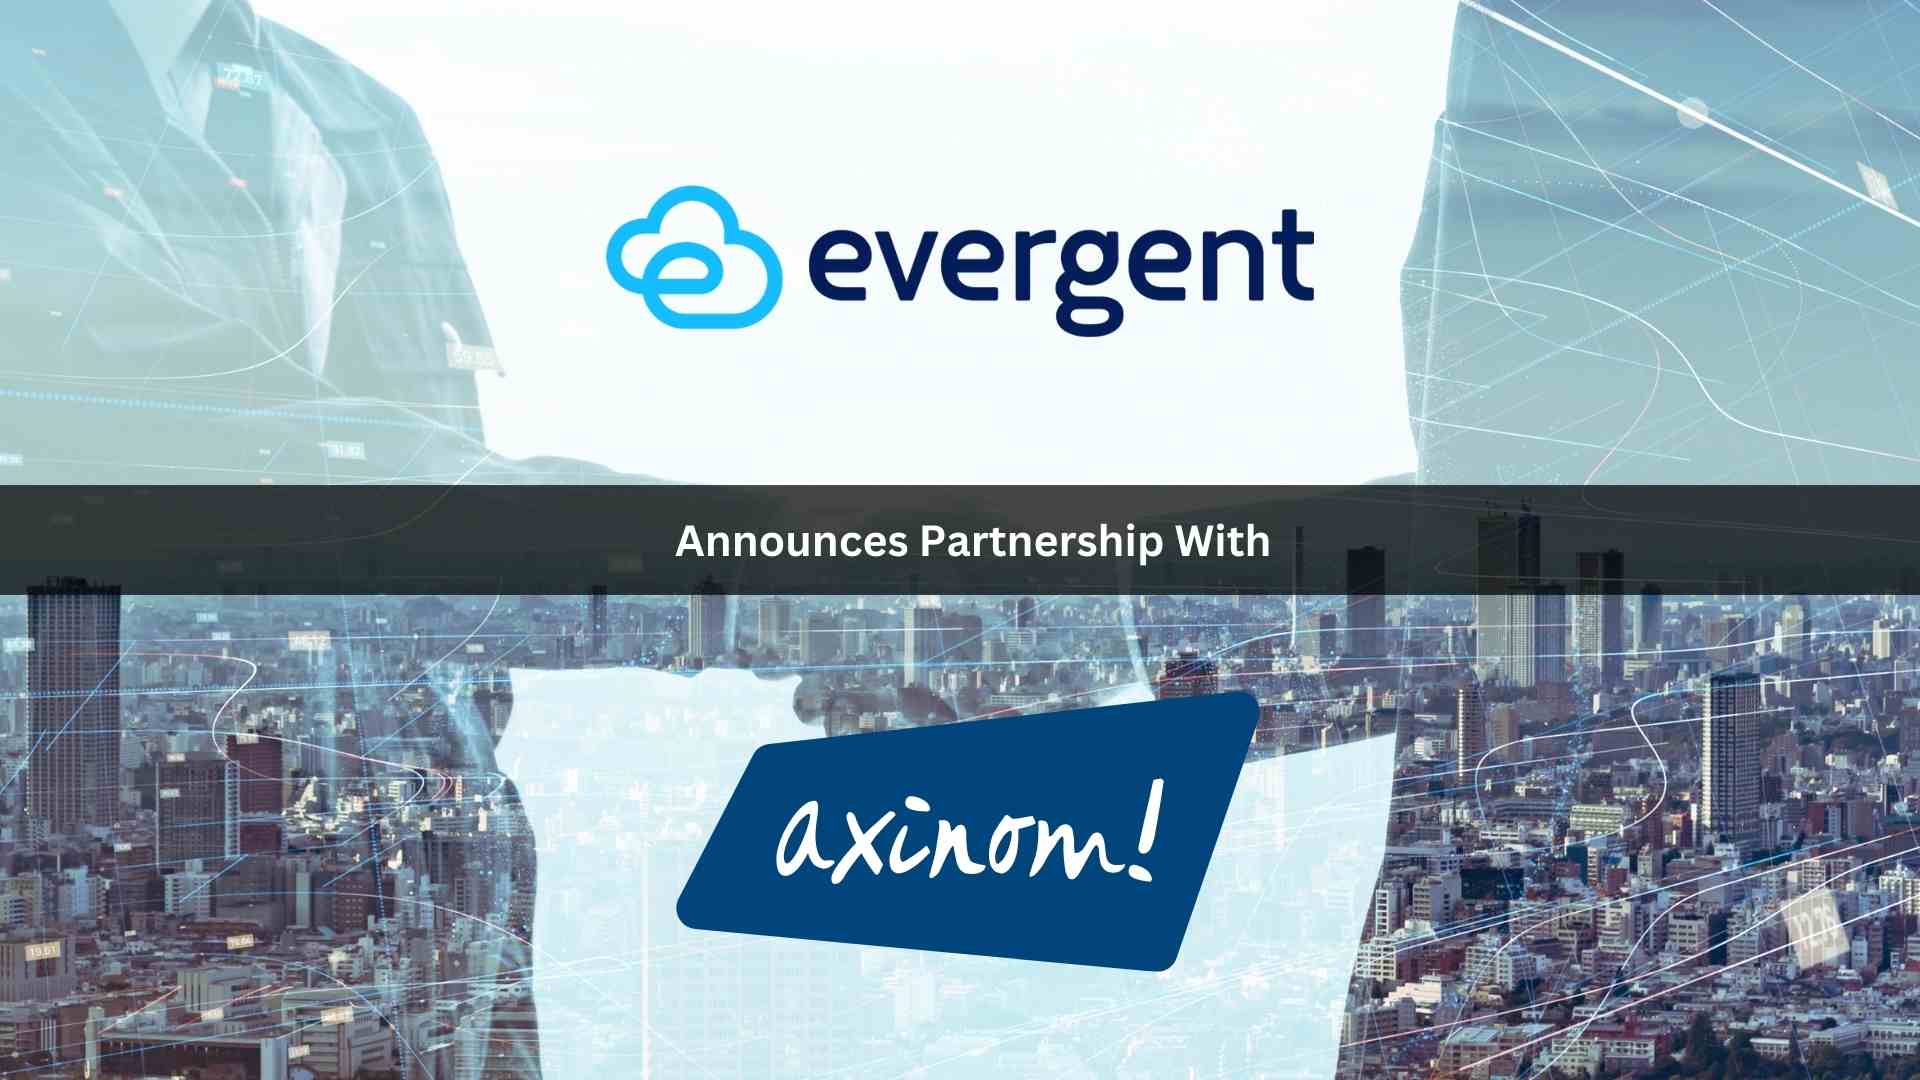 Evergent Announces Partnership with Axinom to Deliver Enhanced Video Streaming Backend and Monetization Solution